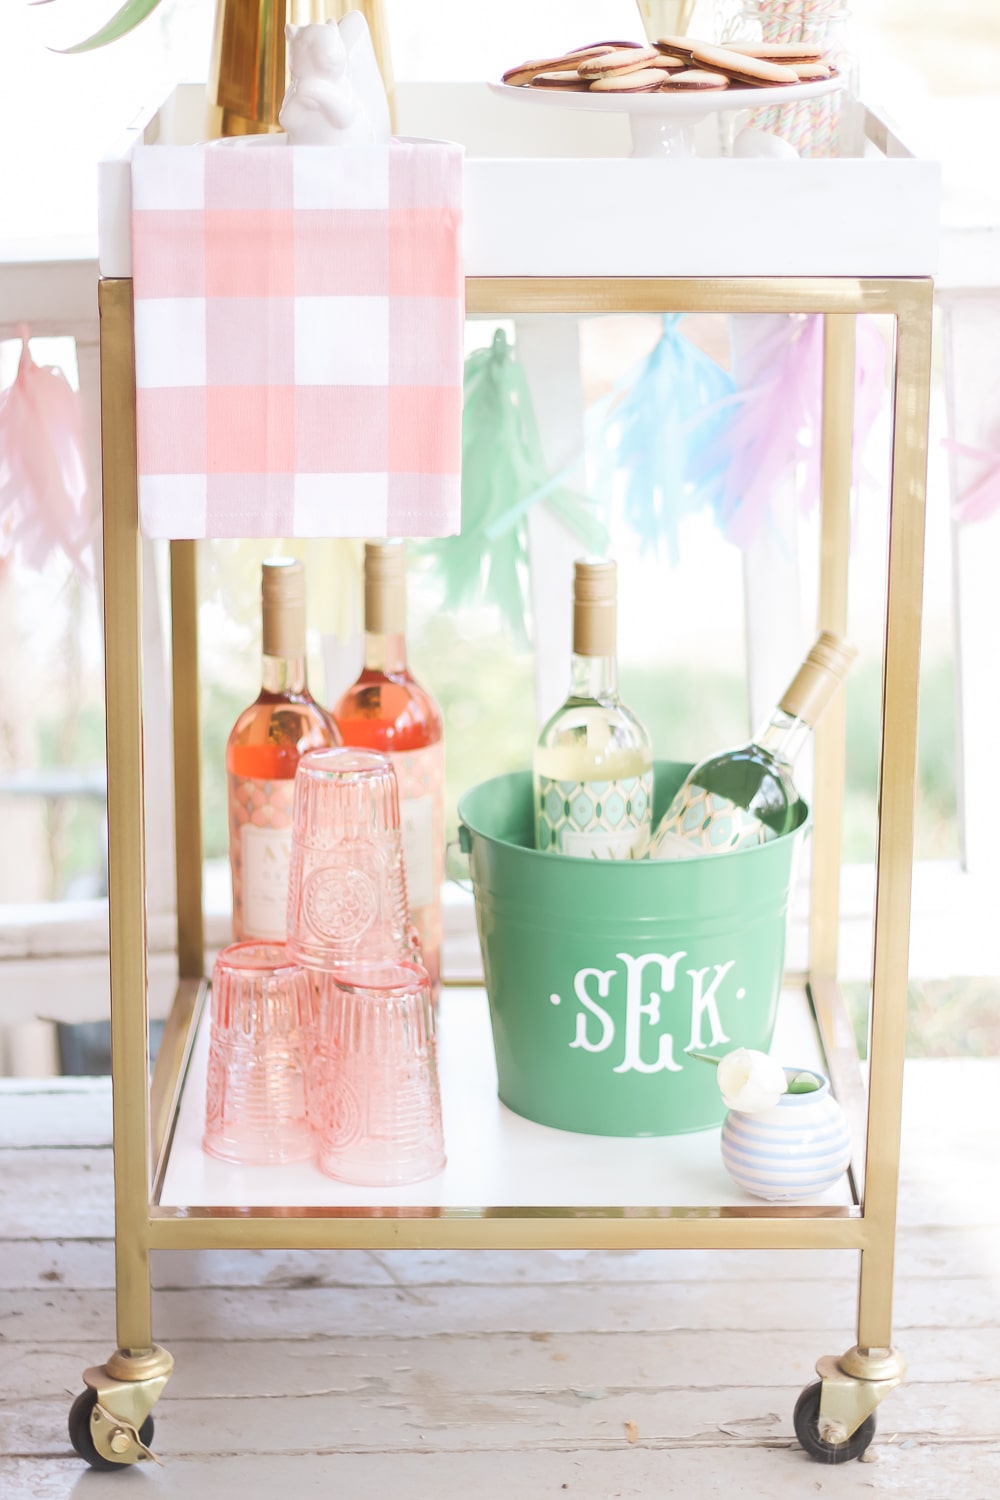 How to create your own personalized ice bucket by DIY blogger Stephanie Ziajka on Diary of a Debutante